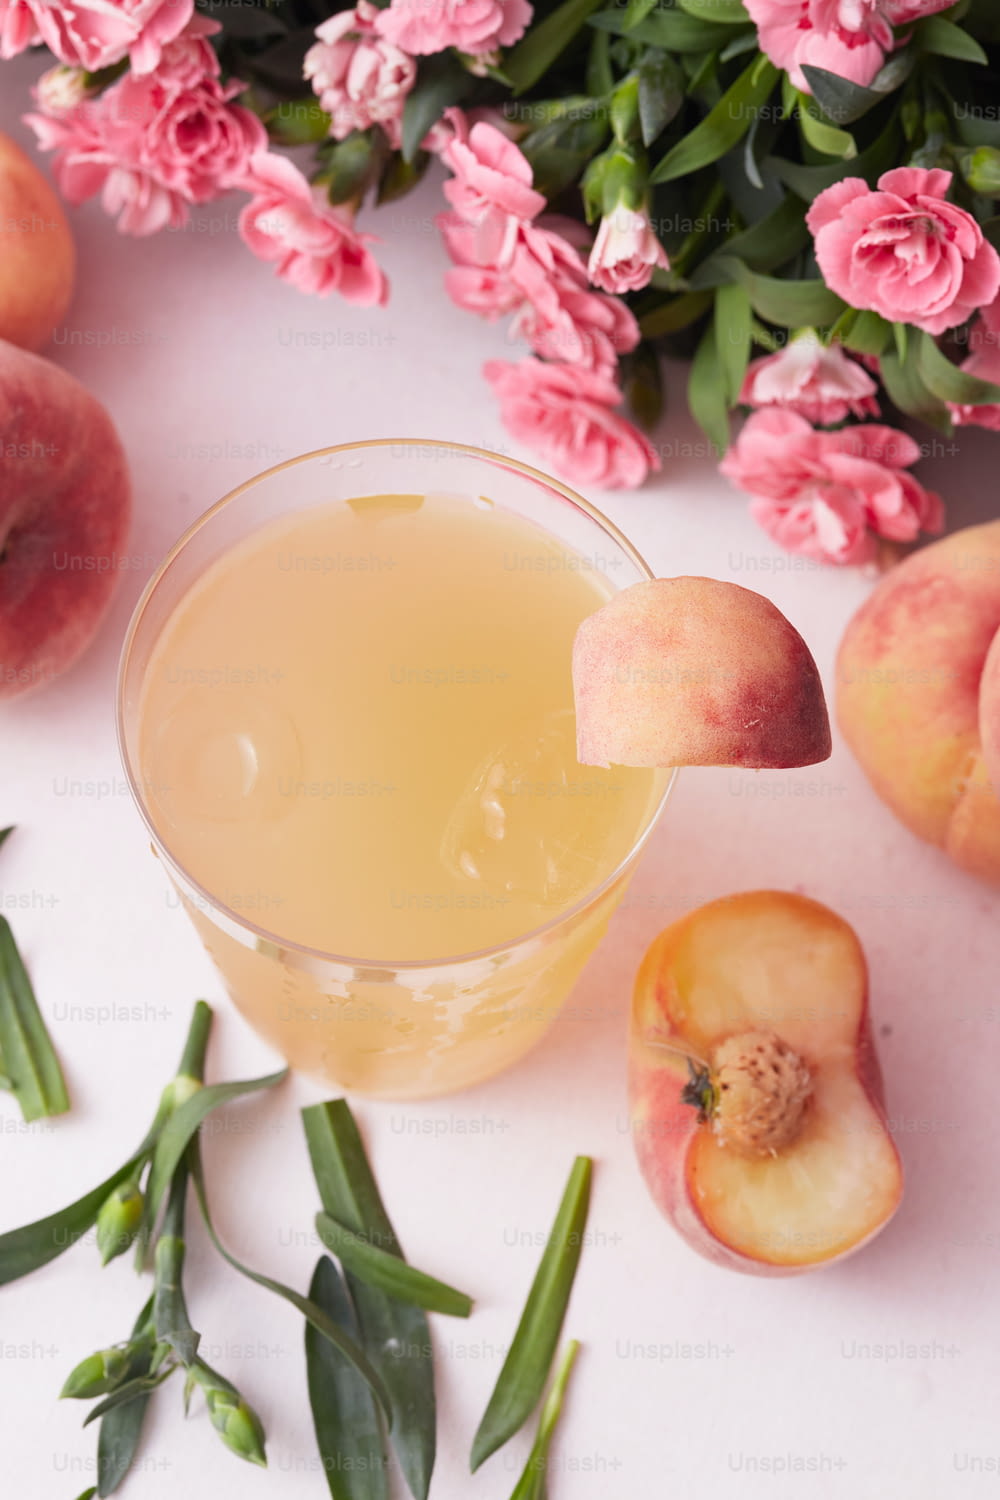 a glass filled with liquid next to peaches and flowers